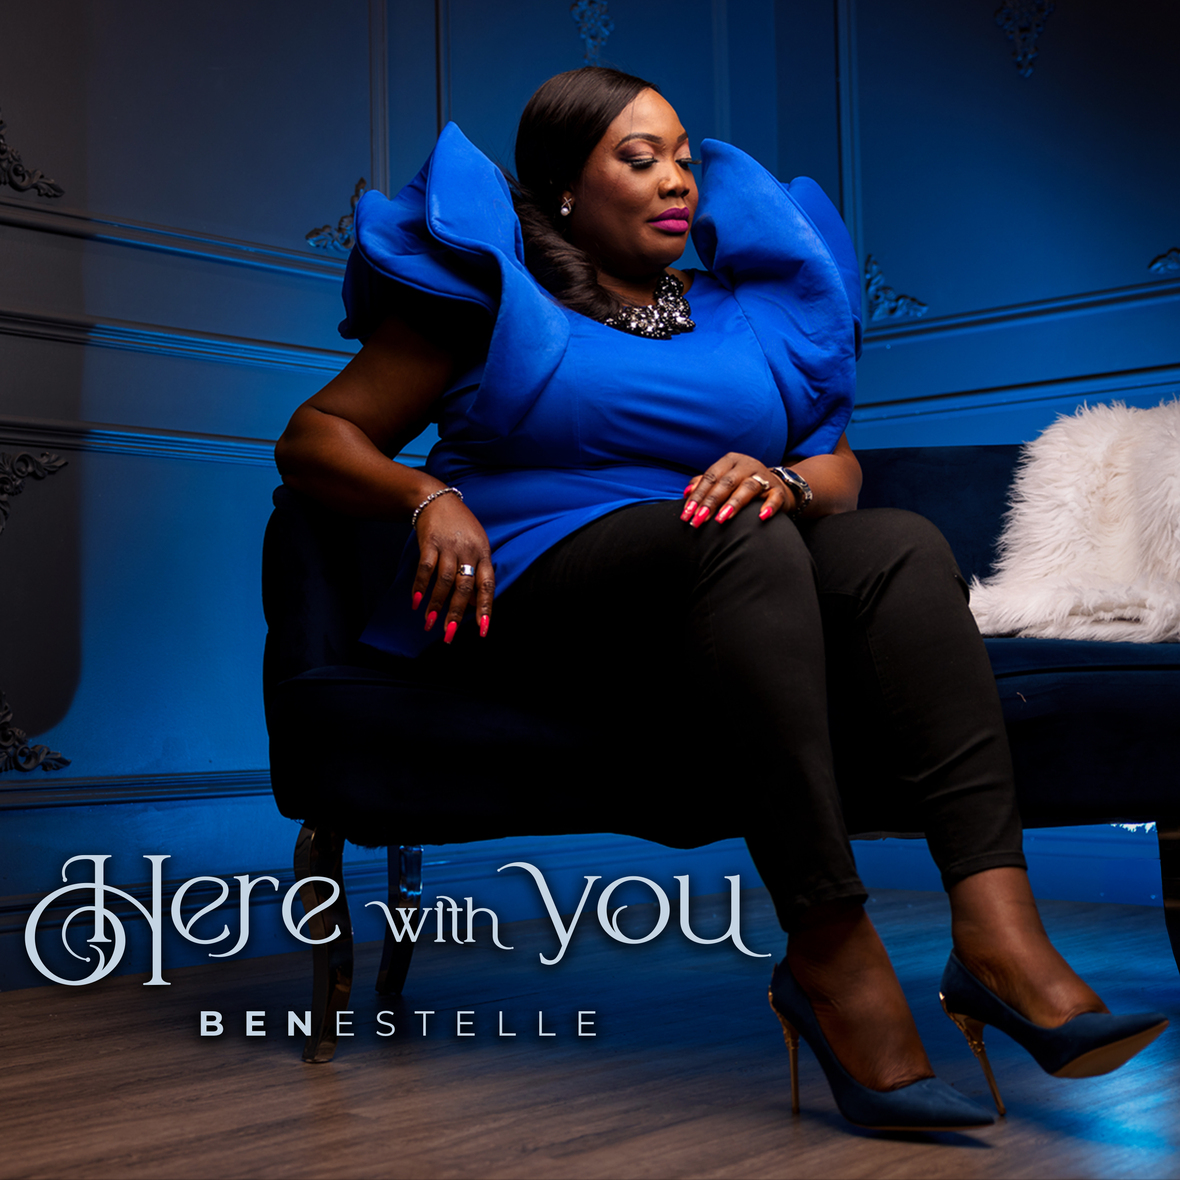 BENESTELLE - HERE WITH YOU